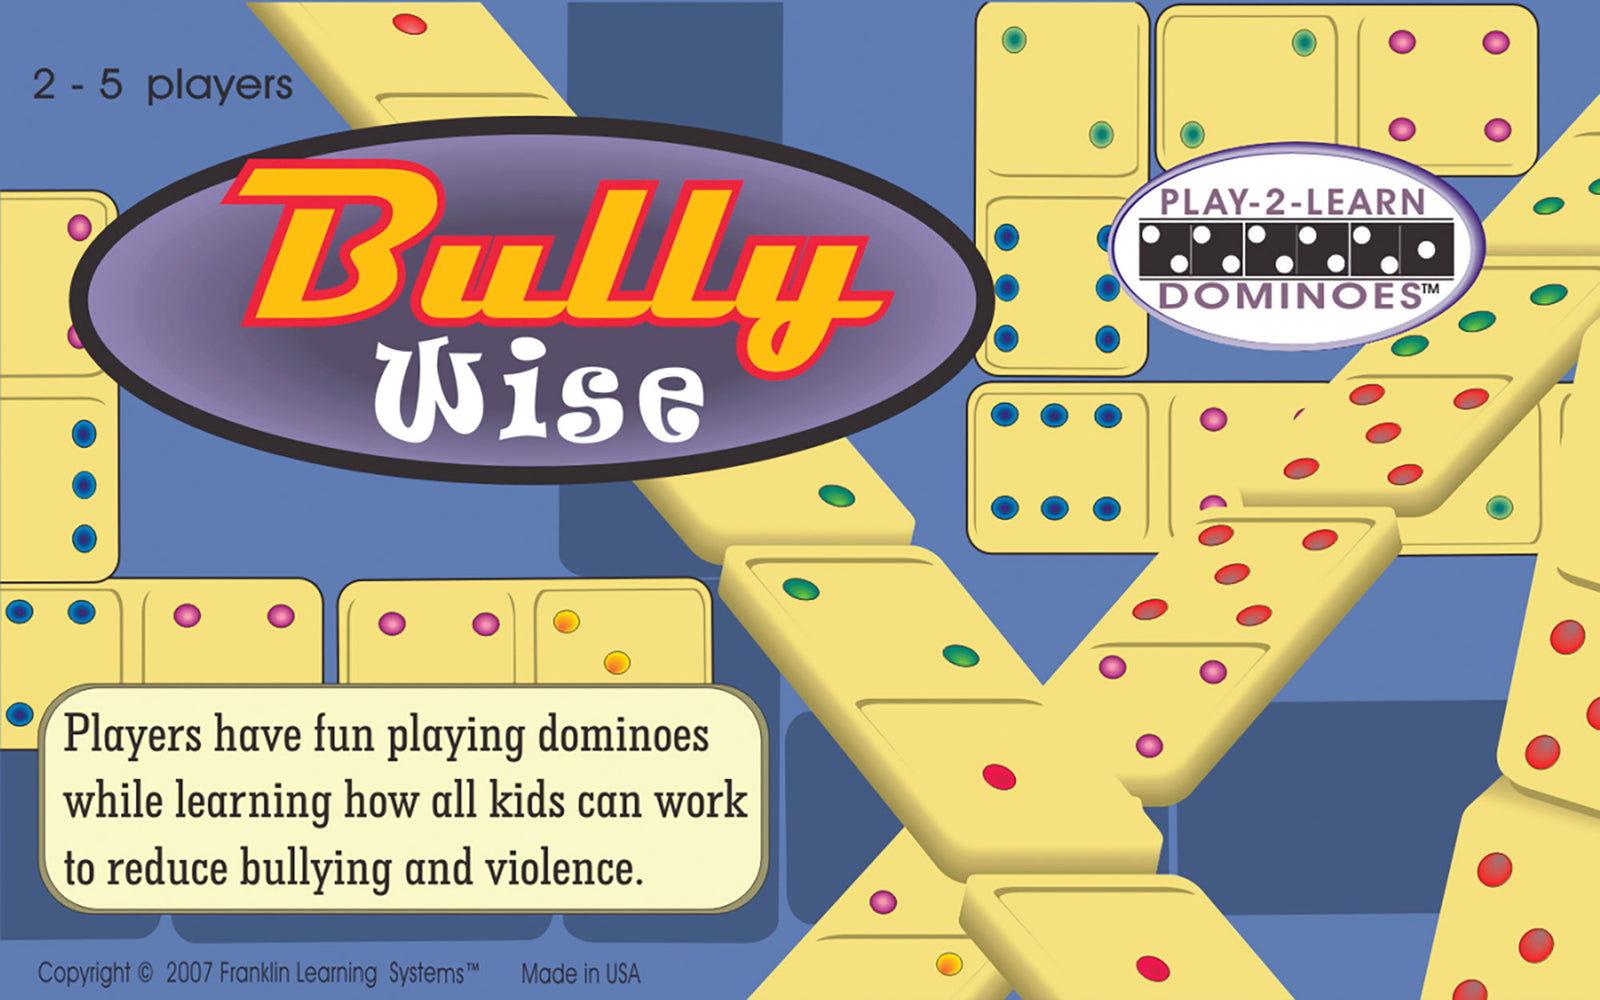 Bully-weise: Play-2-Learn-Dominosteine